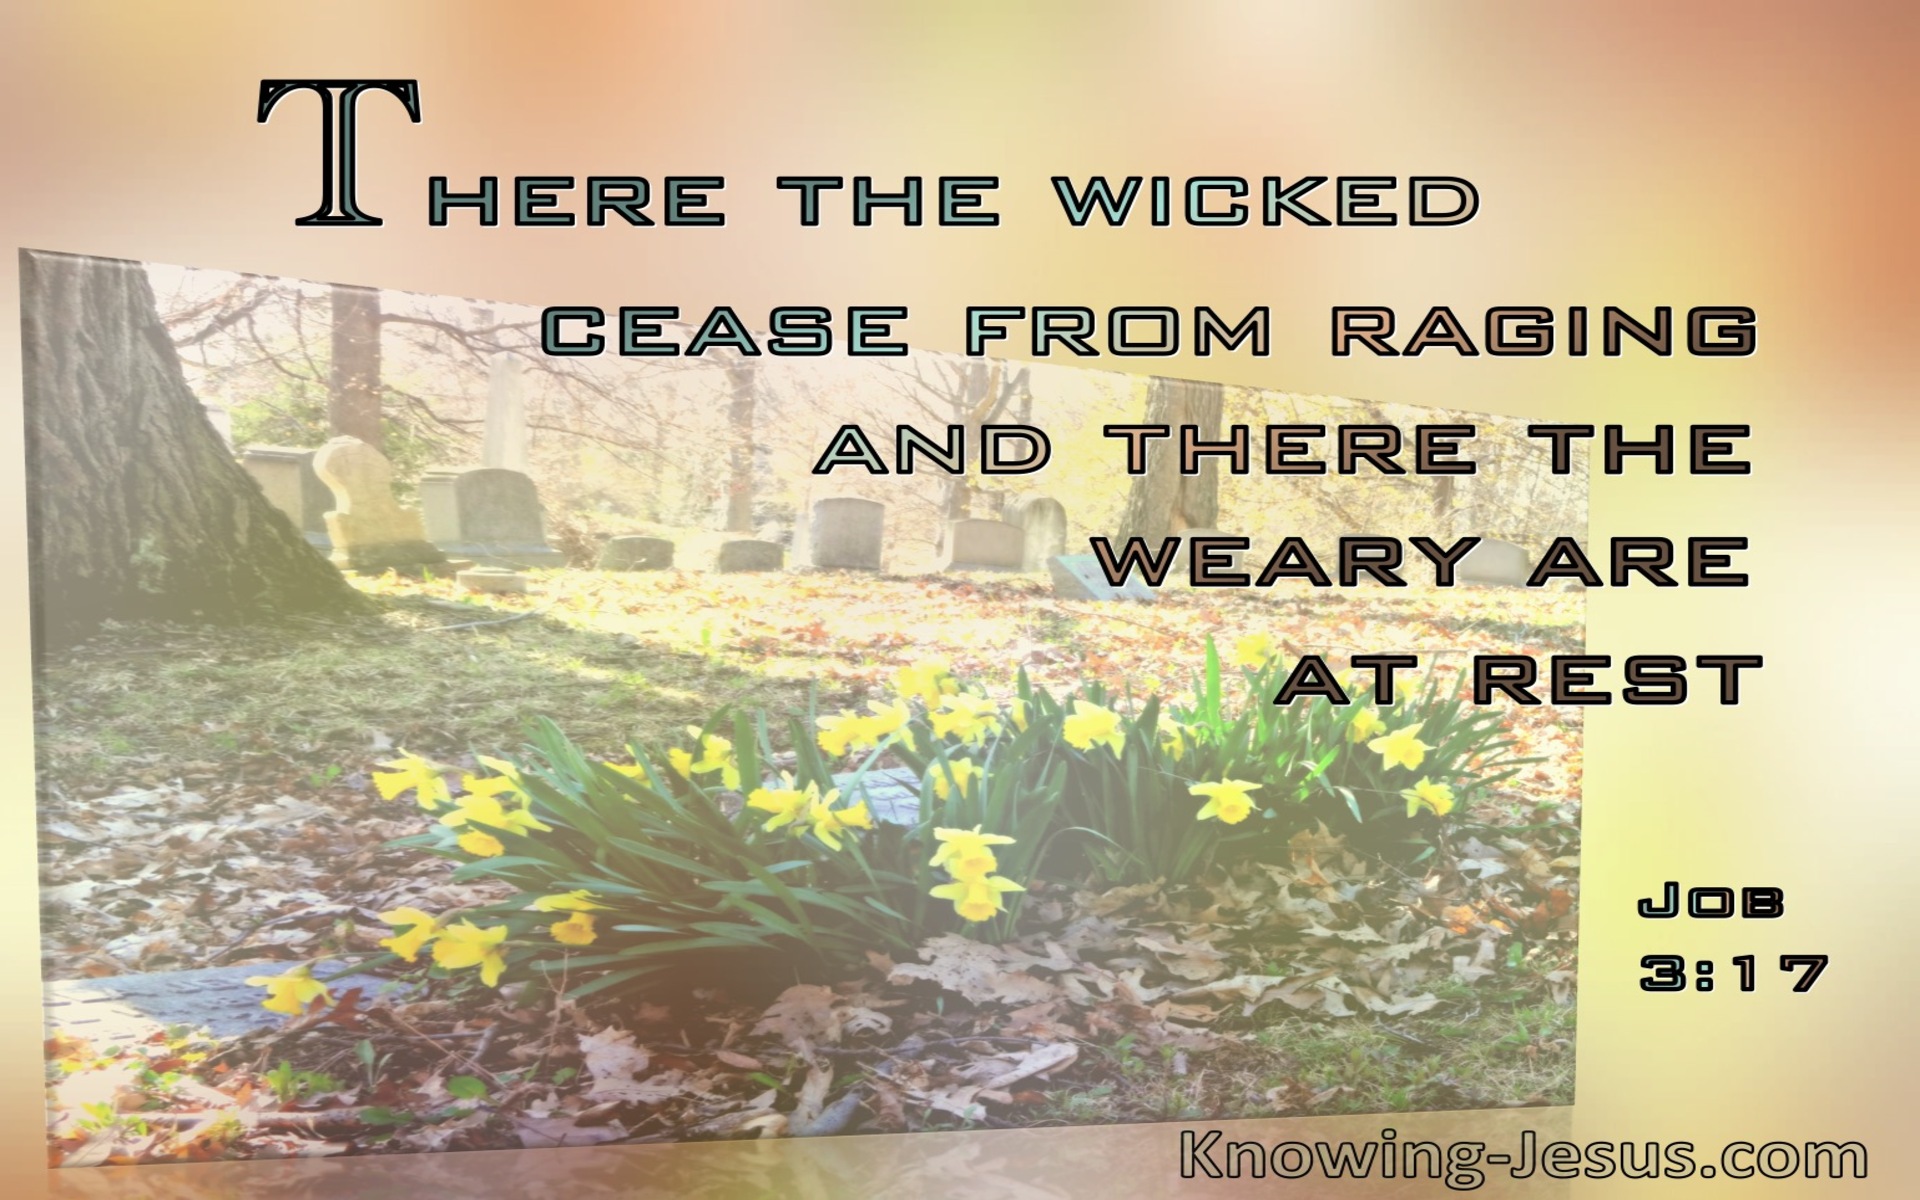 Job 3:17 The Wicked Cease Raging The Weary Are At Rest (beige) 